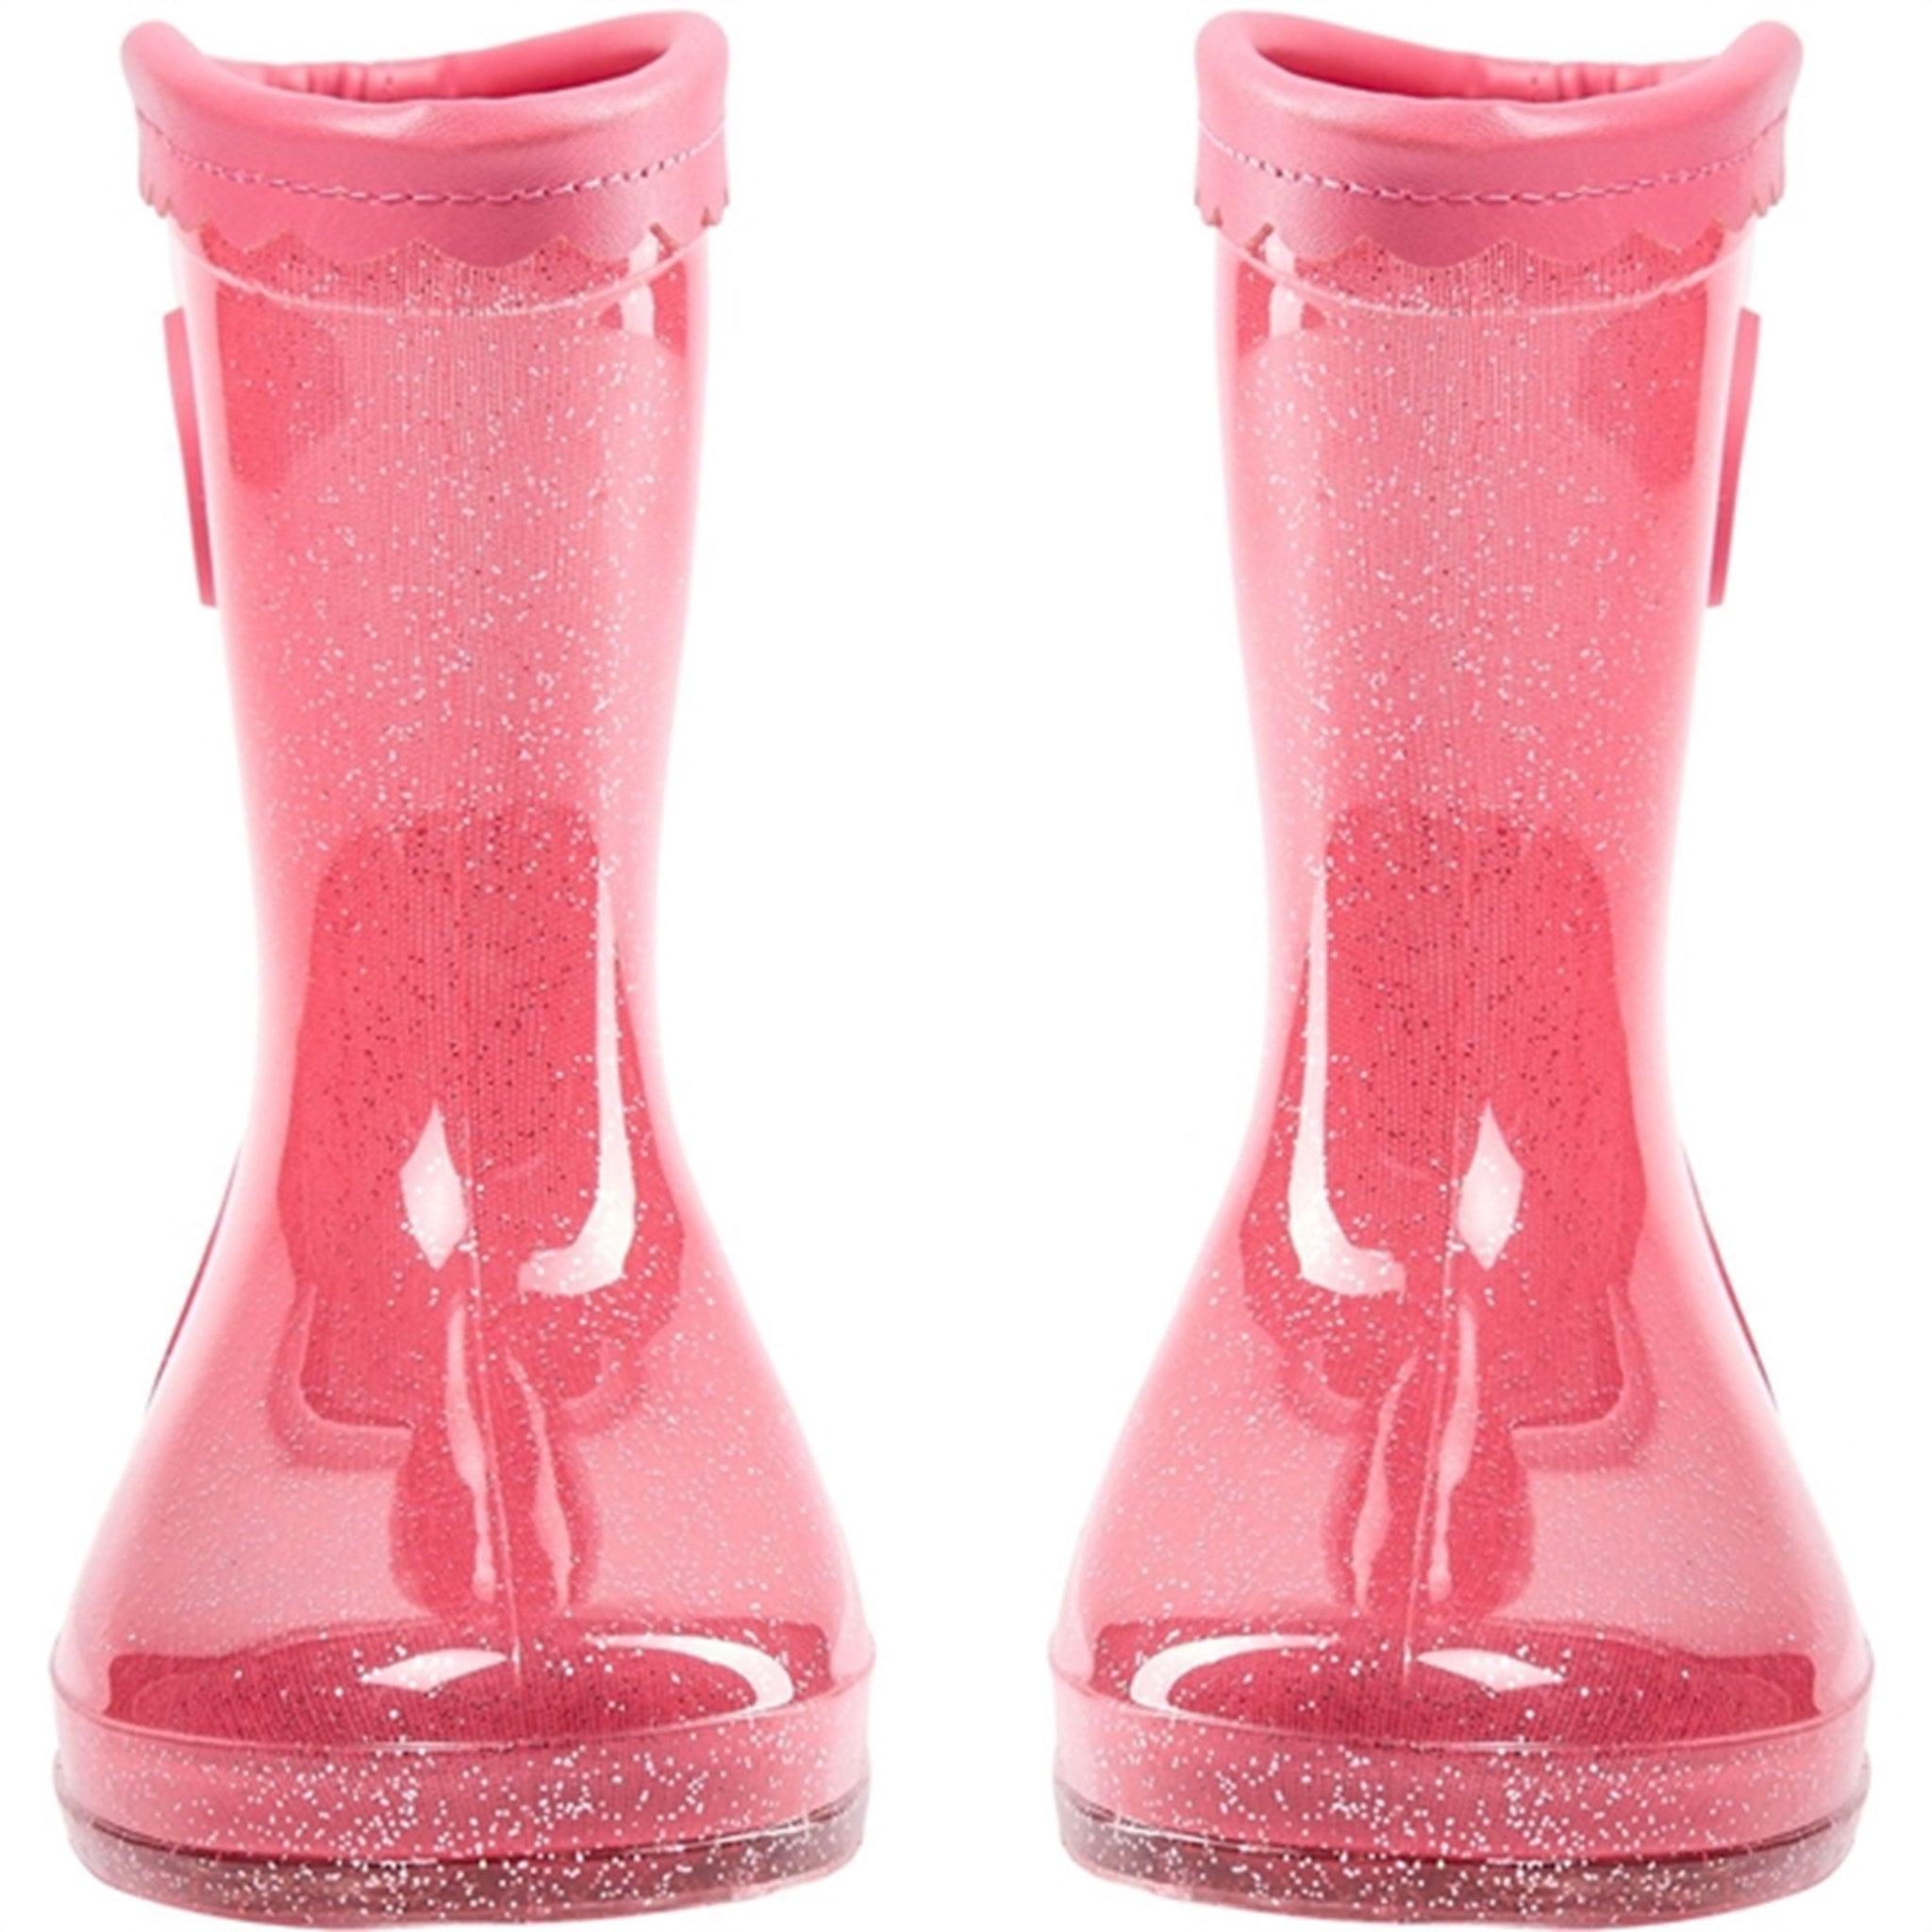 Sofie Schnoor Rubber Boots Coral Pink 8